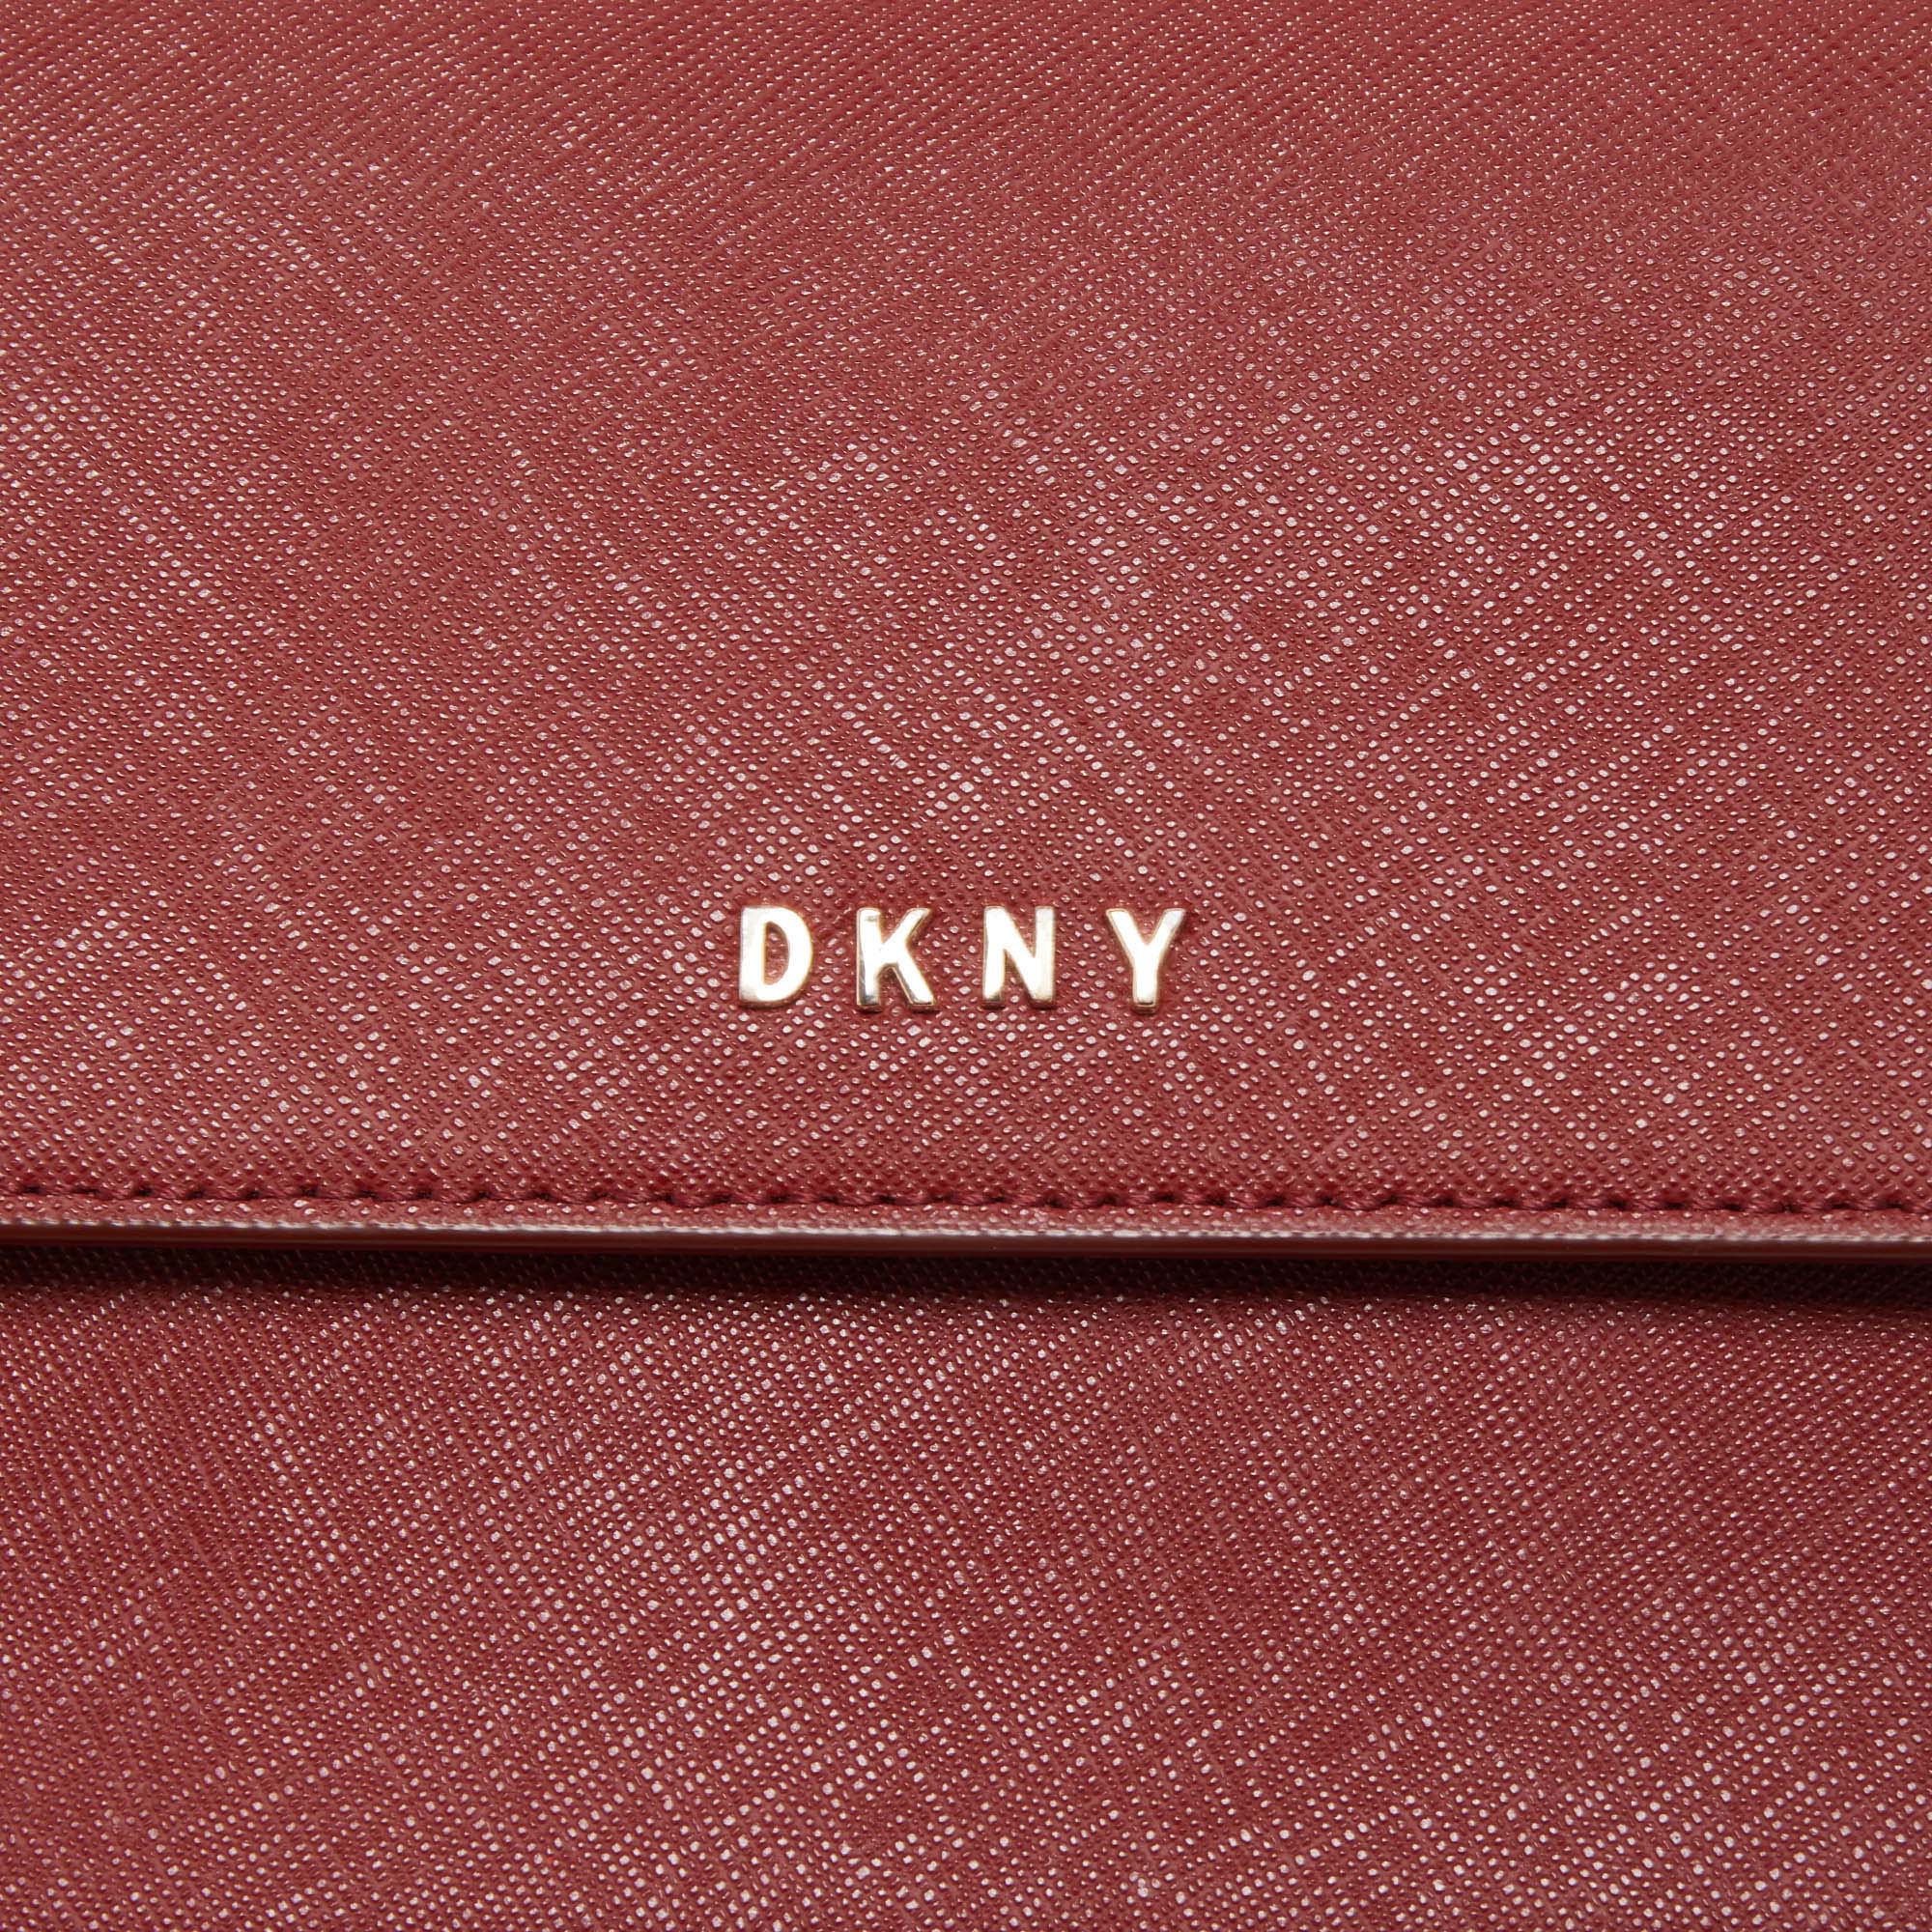 DKNY Red Leather Flap Chain Shoulder Bag